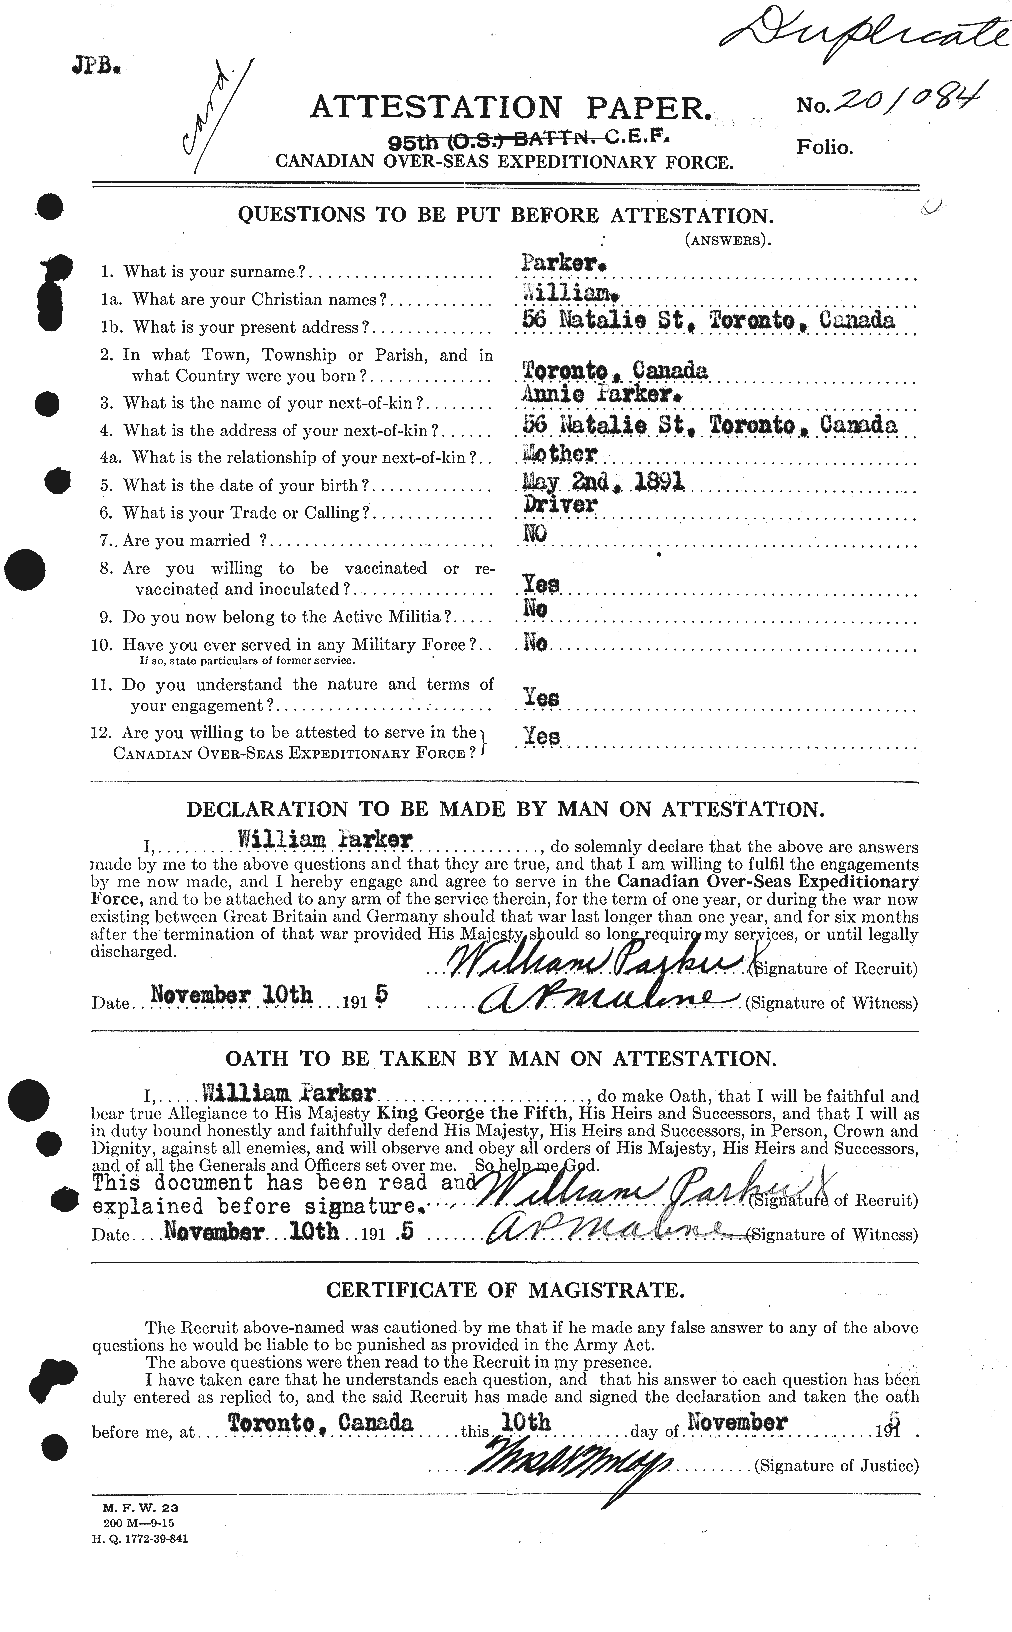 Personnel Records of the First World War - CEF 565717a